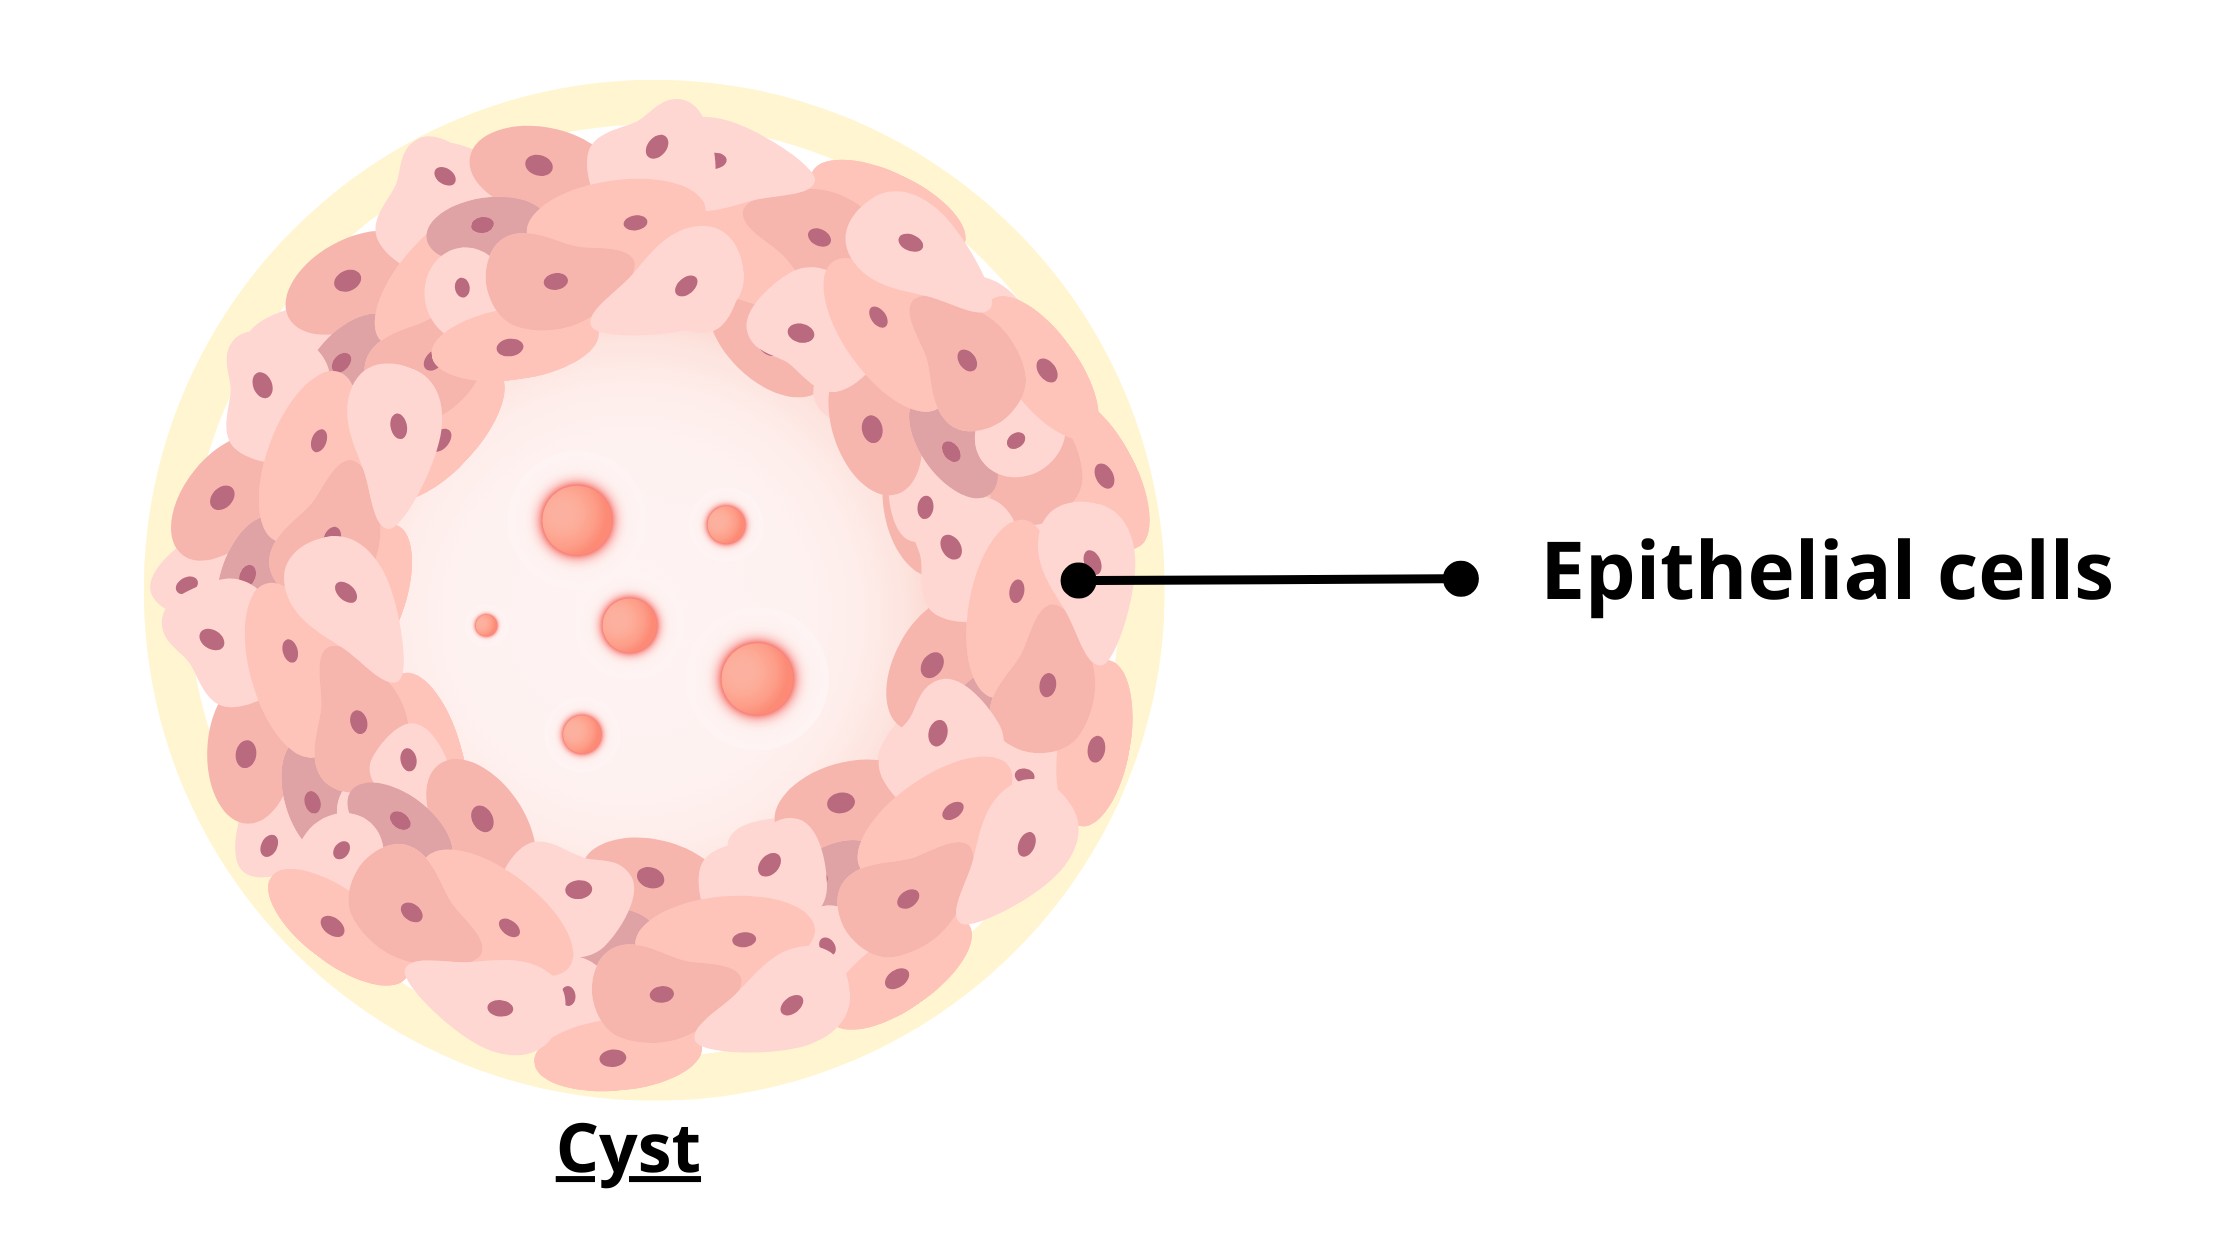 cystic cavity lined with epithelial cells